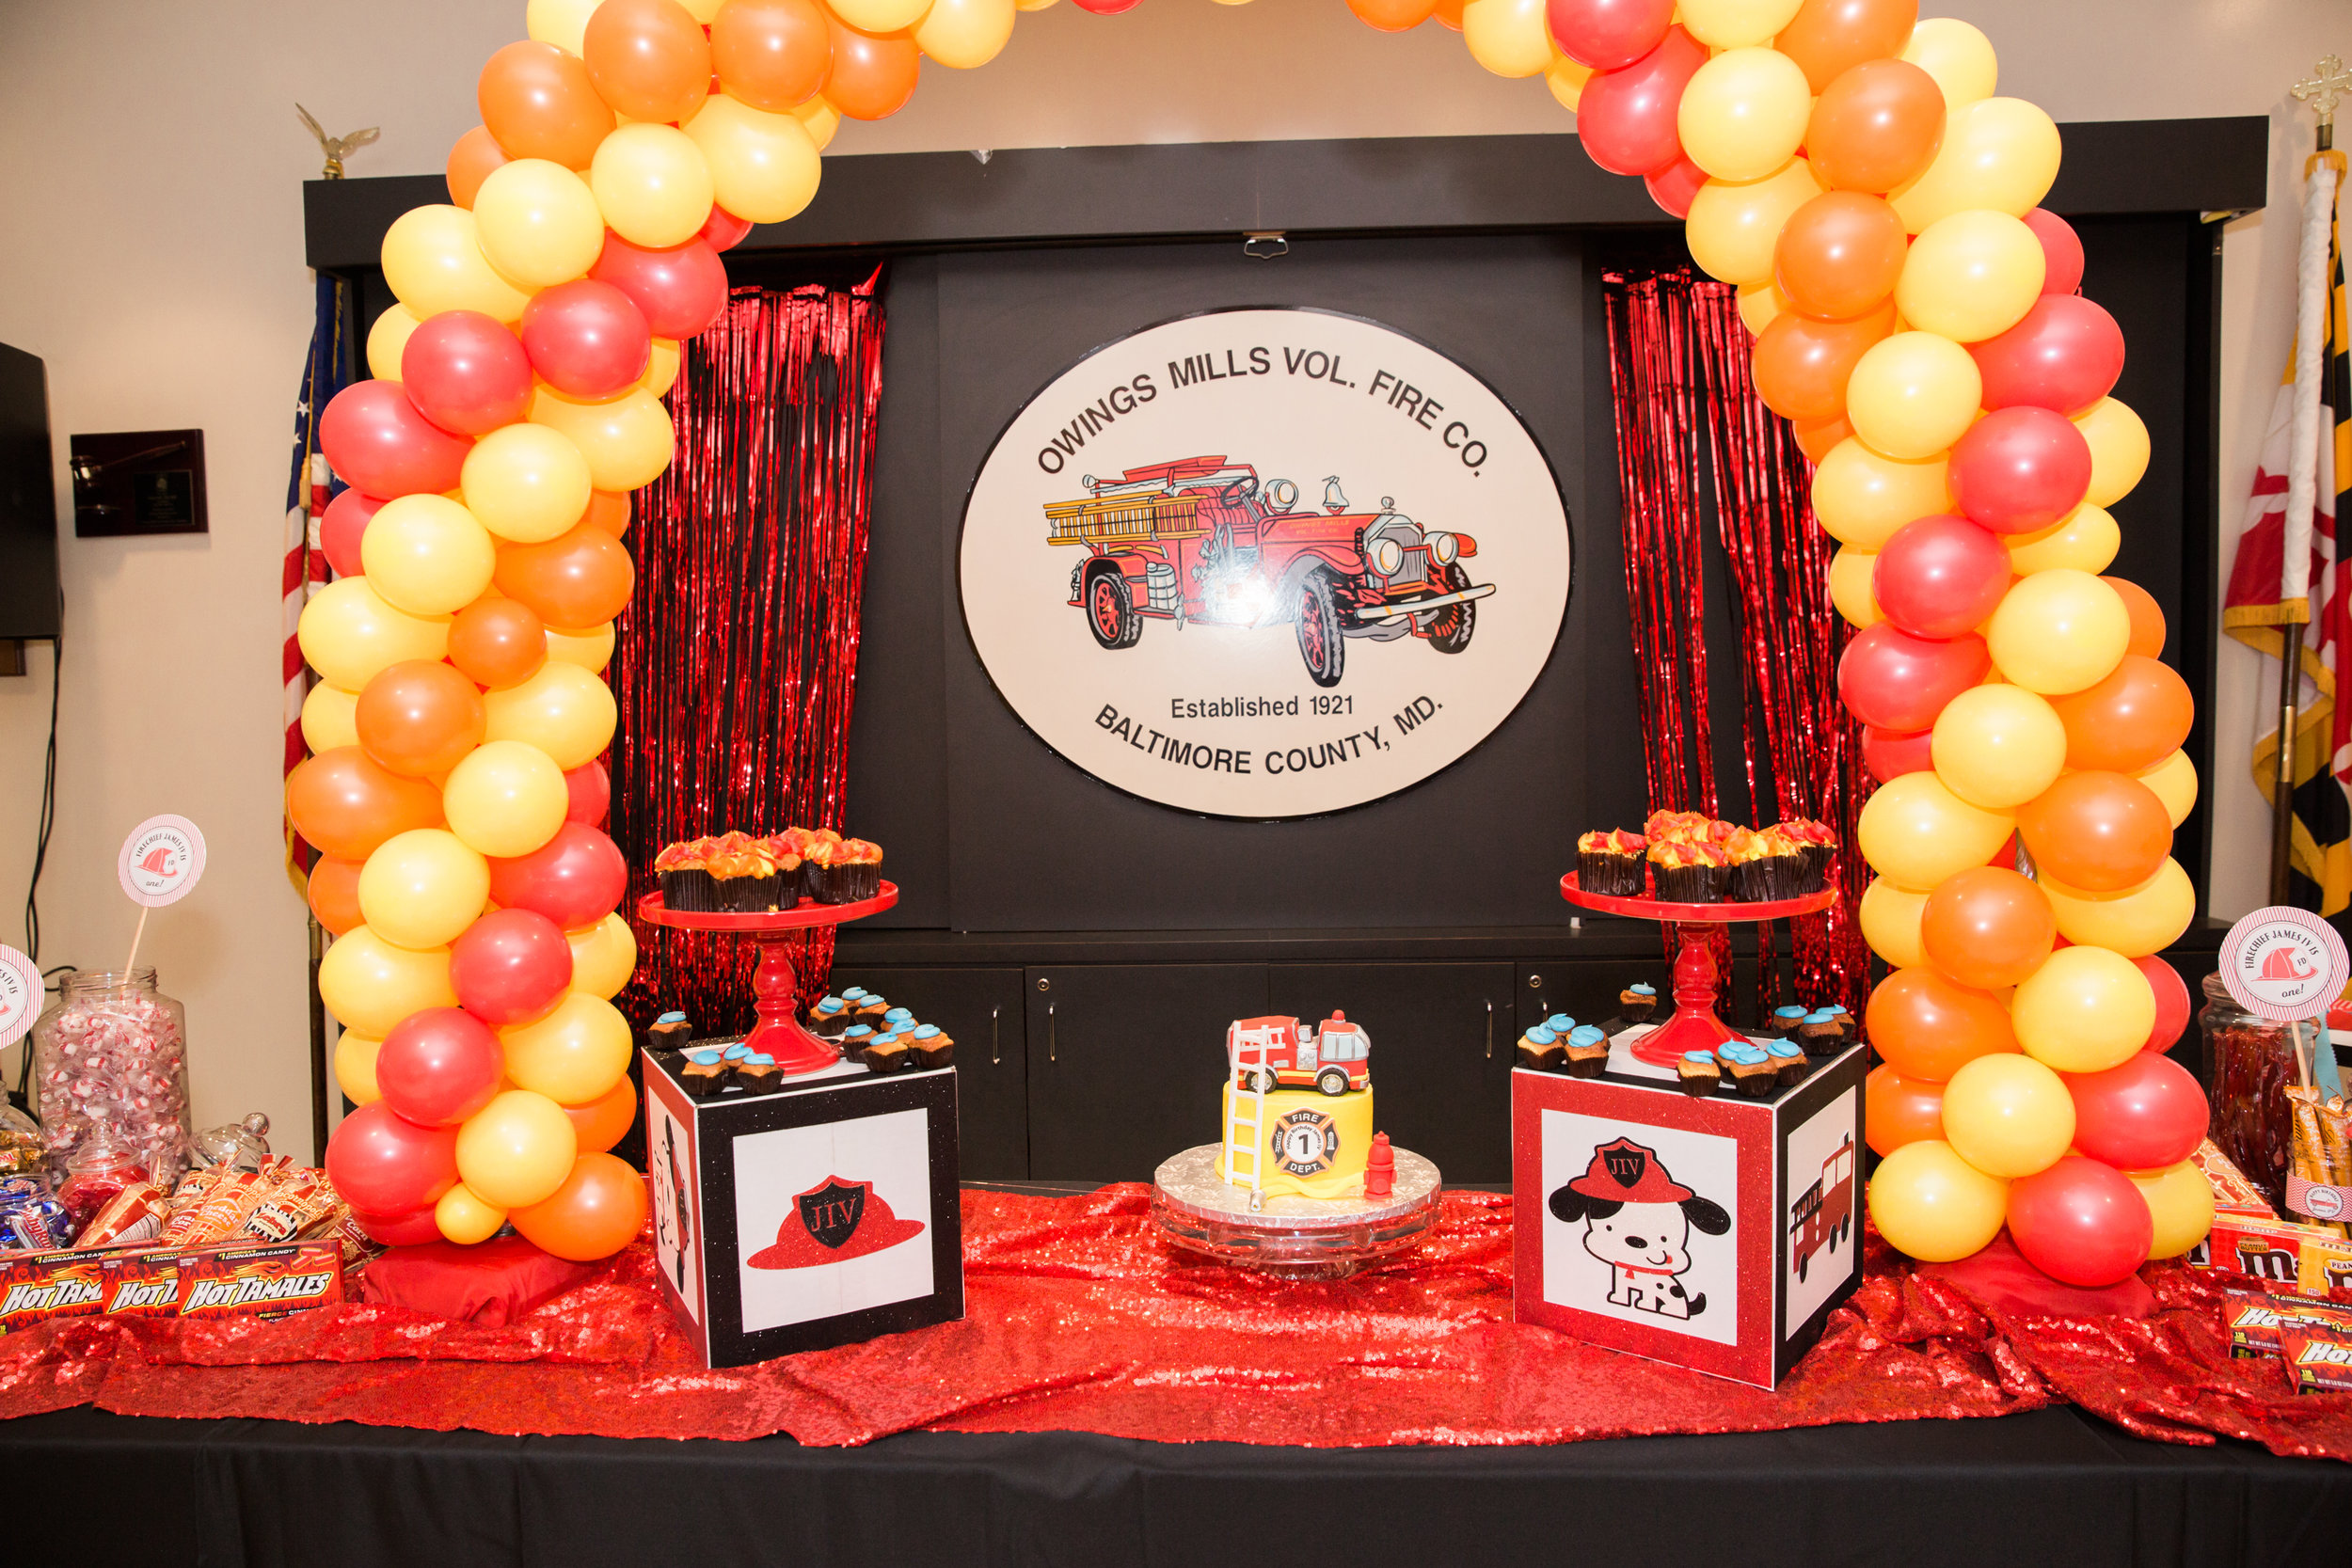 Fireman Birthday Party Ideas  Decorations Owings Mills Fire Department Maryland Family Photographers Megapixels Media Photography (41 of 55).jpg